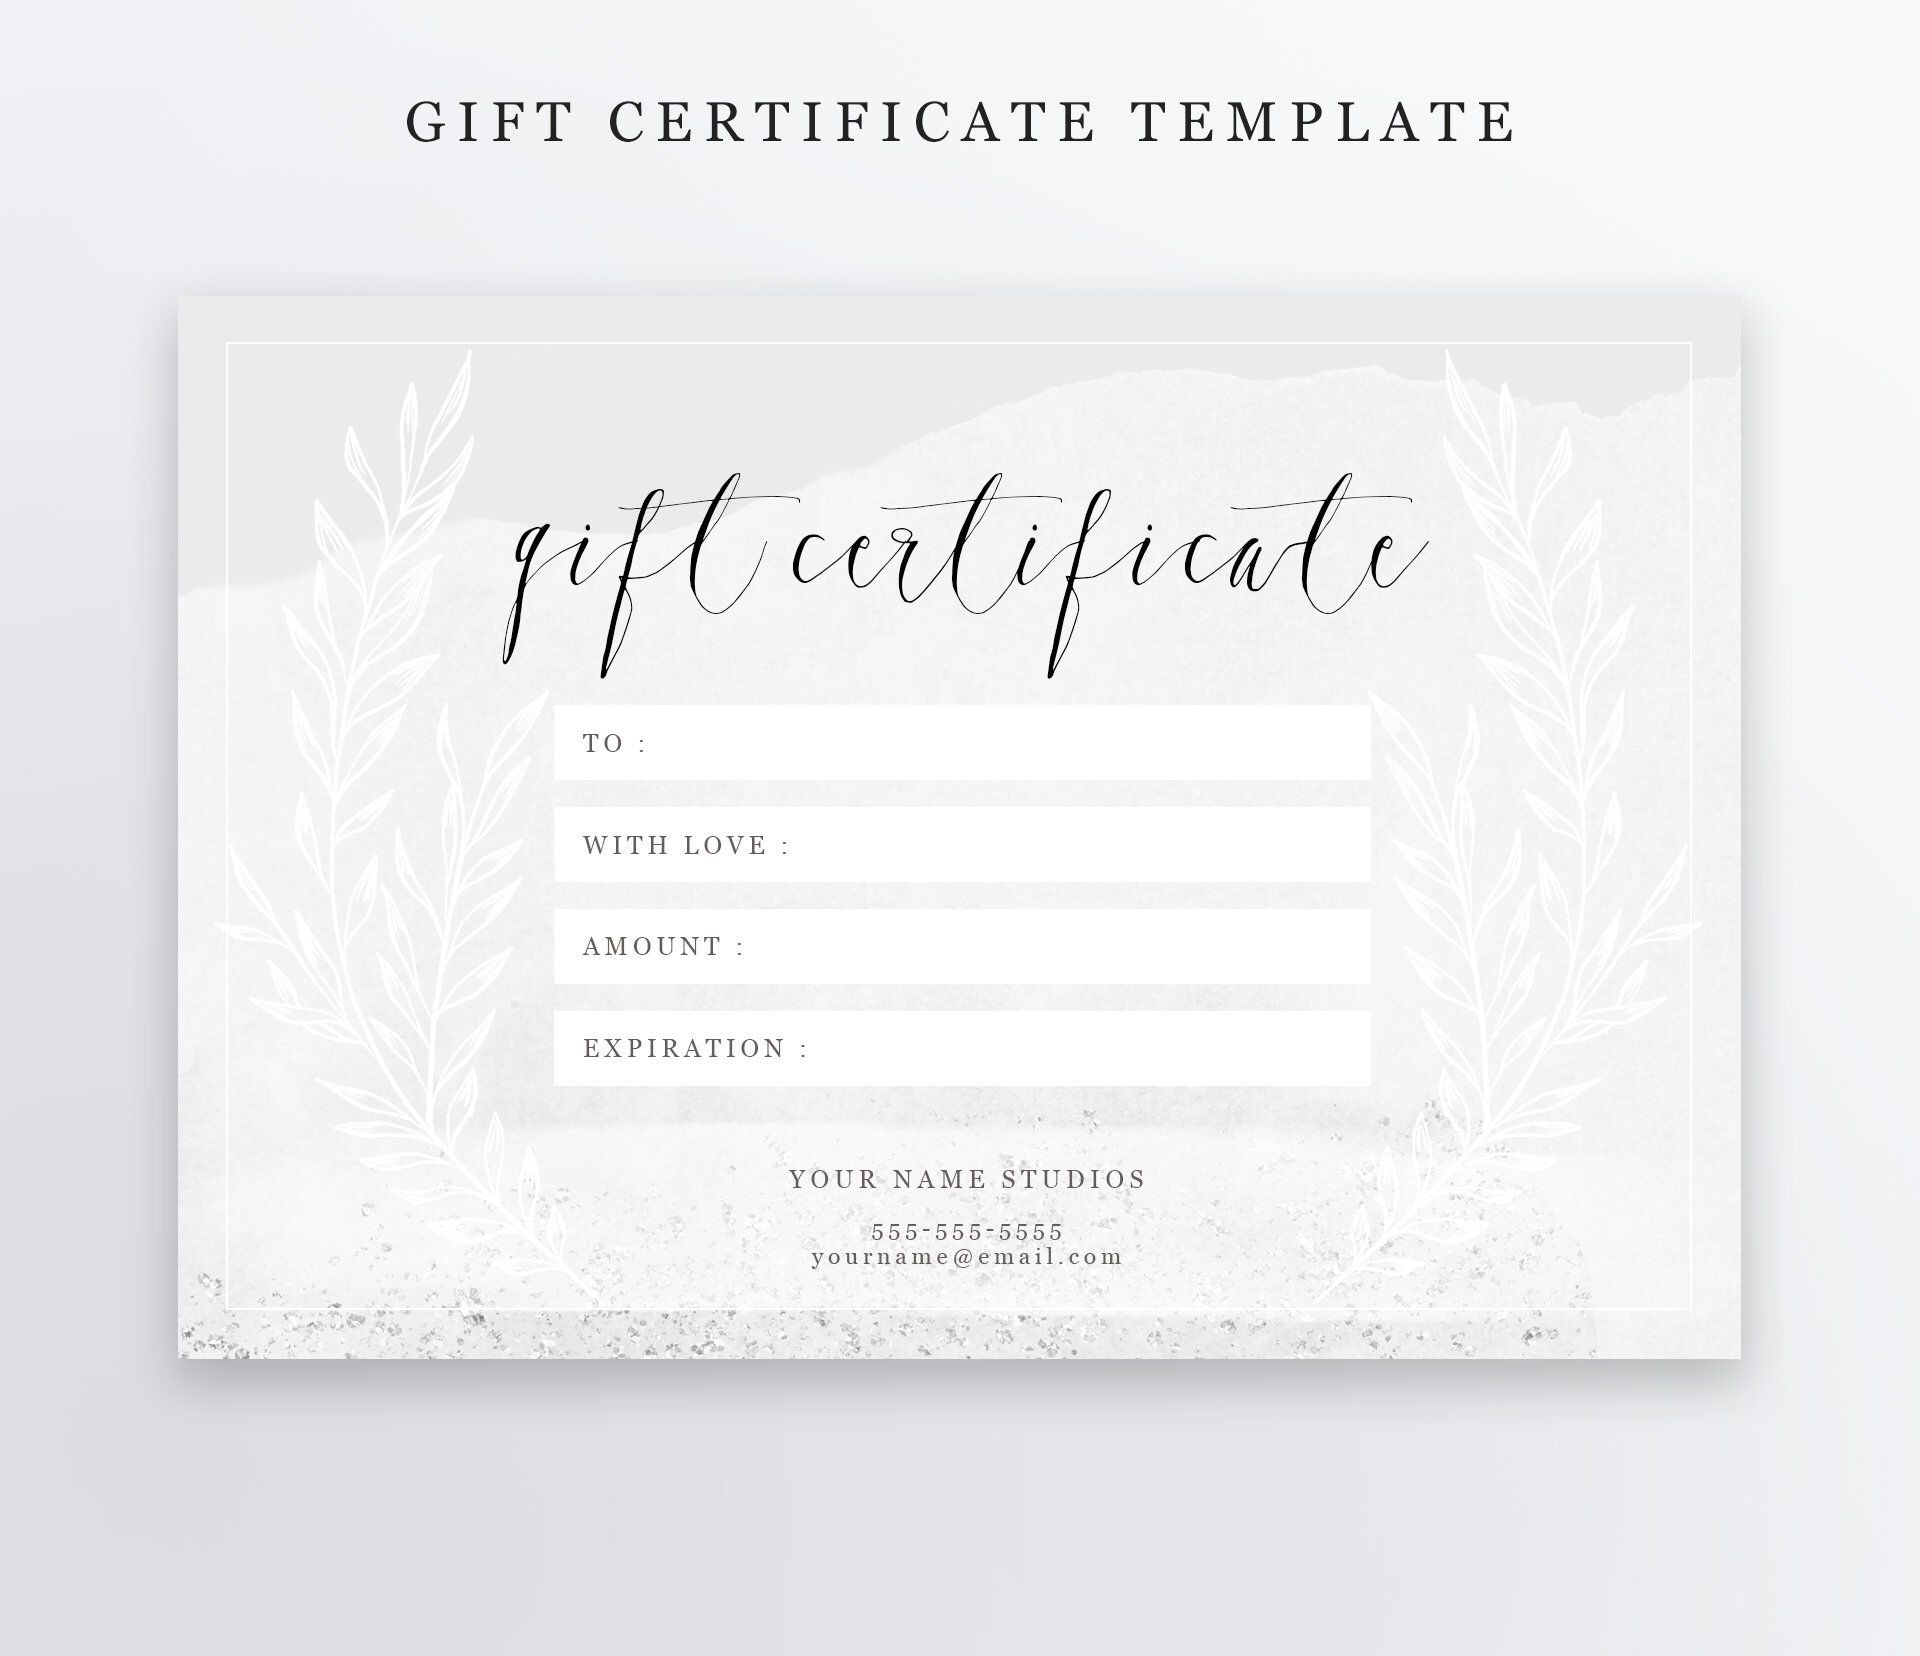 Photography Gift Certificate Template – Psd 4X6 – Editable Inside Photoshoot Gift Certificate Template